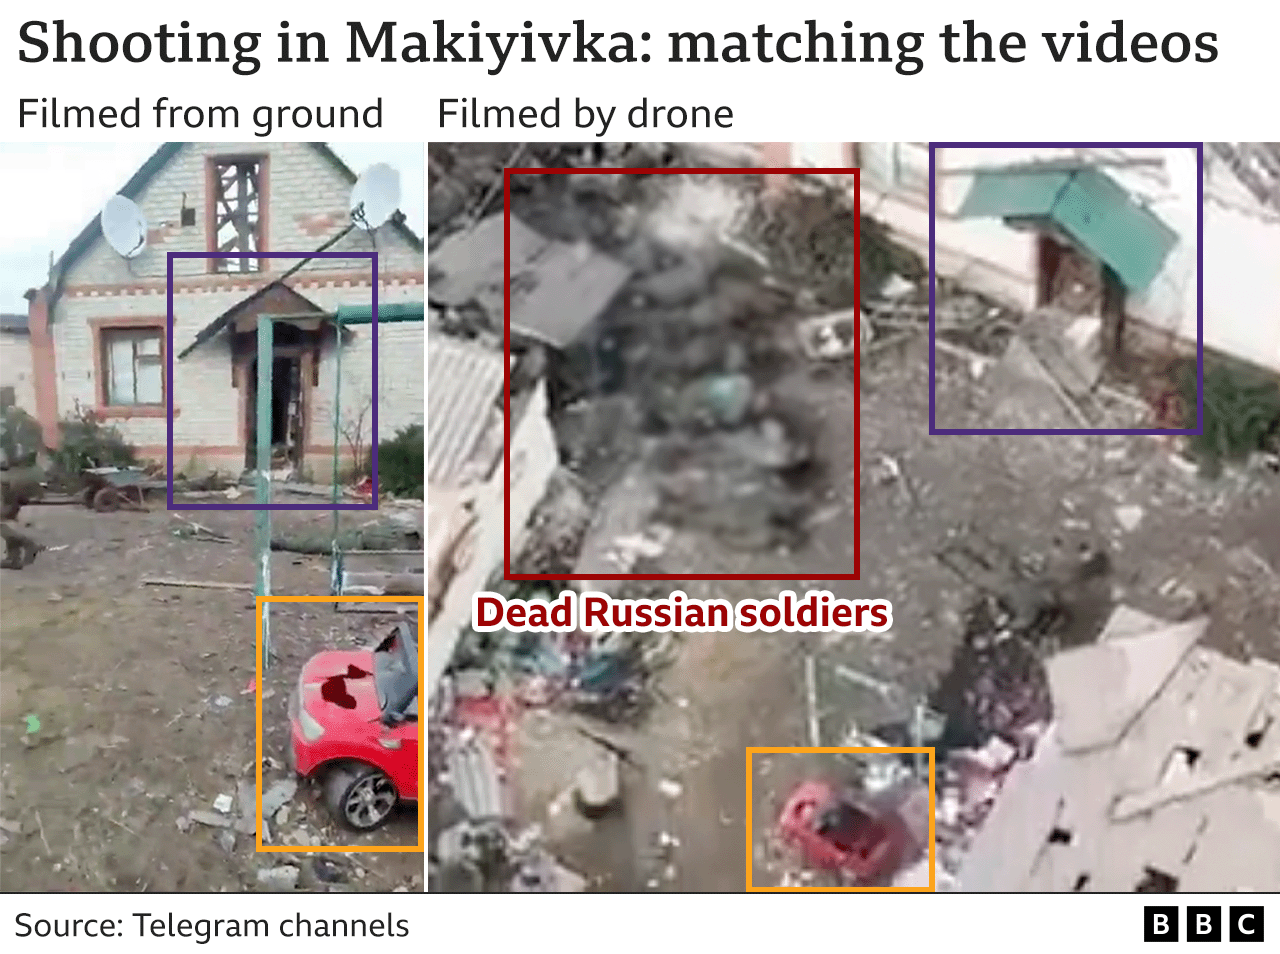 Graphic showing split screen comparing two images of site of killings